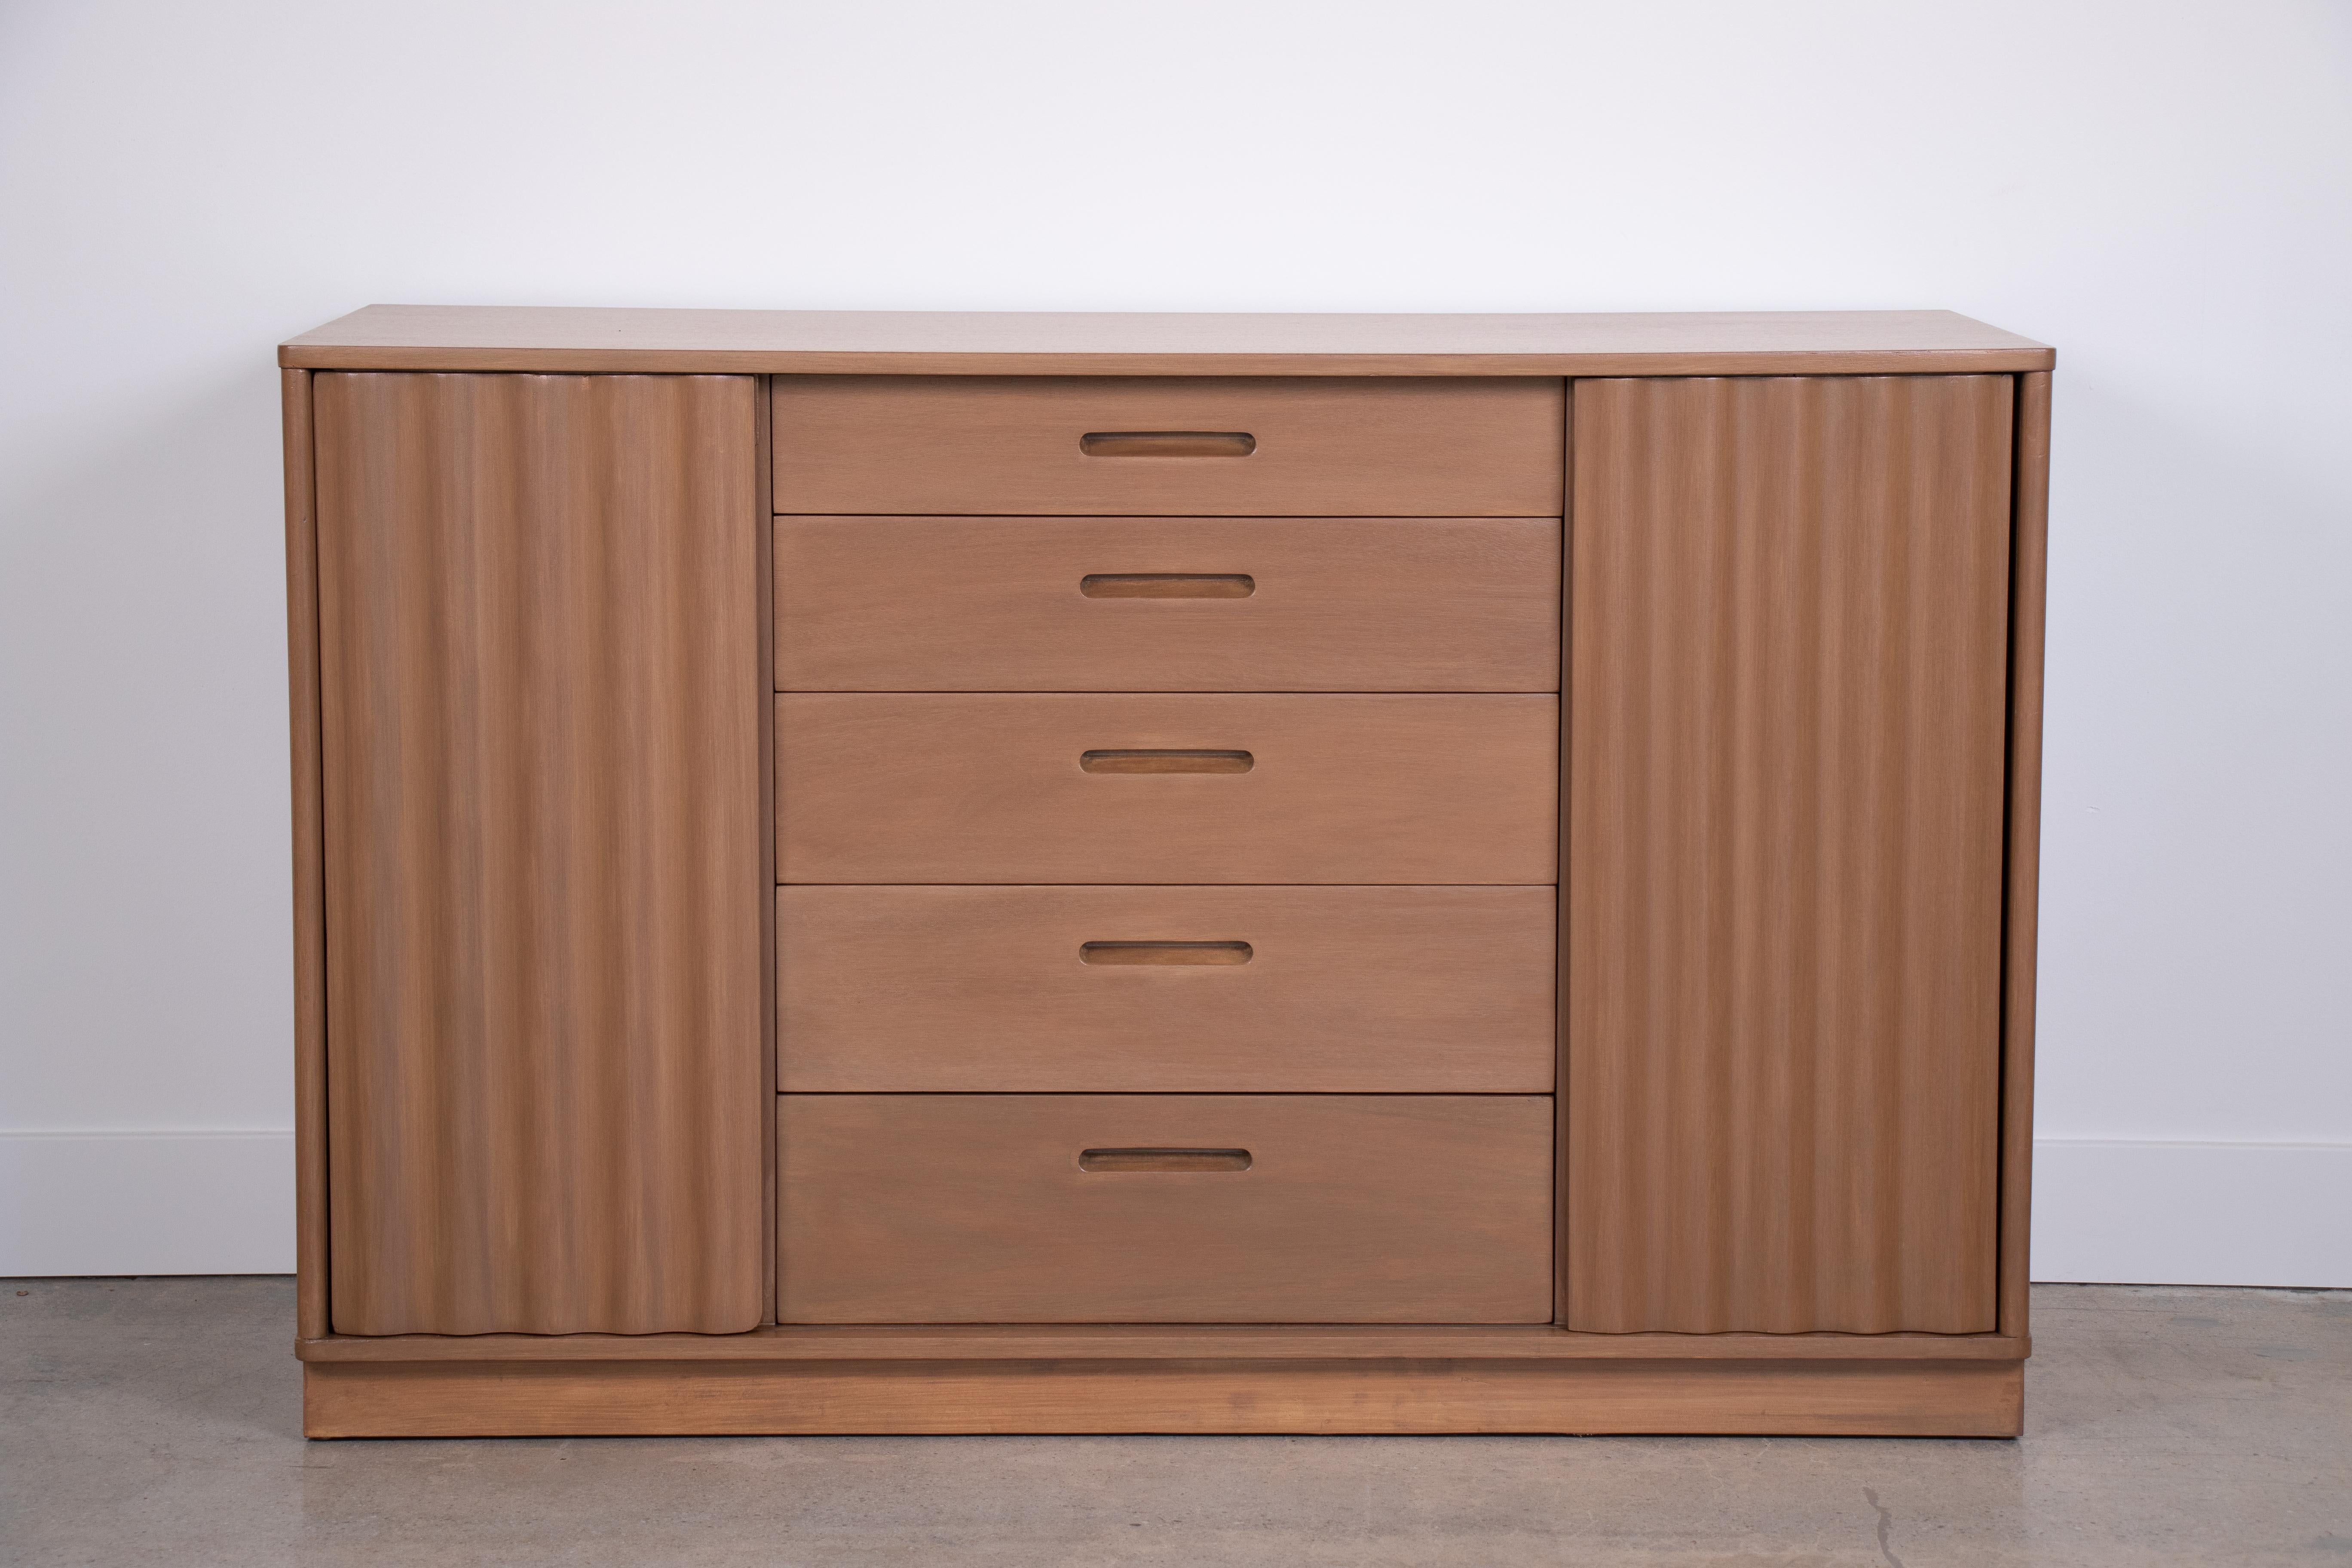 Edward Wormley for Dunbar cabinet. Beautiful sliding wavy front doors and 5 center drawers with side shelving. Newly refinished. Dunbar tag inside drawer.